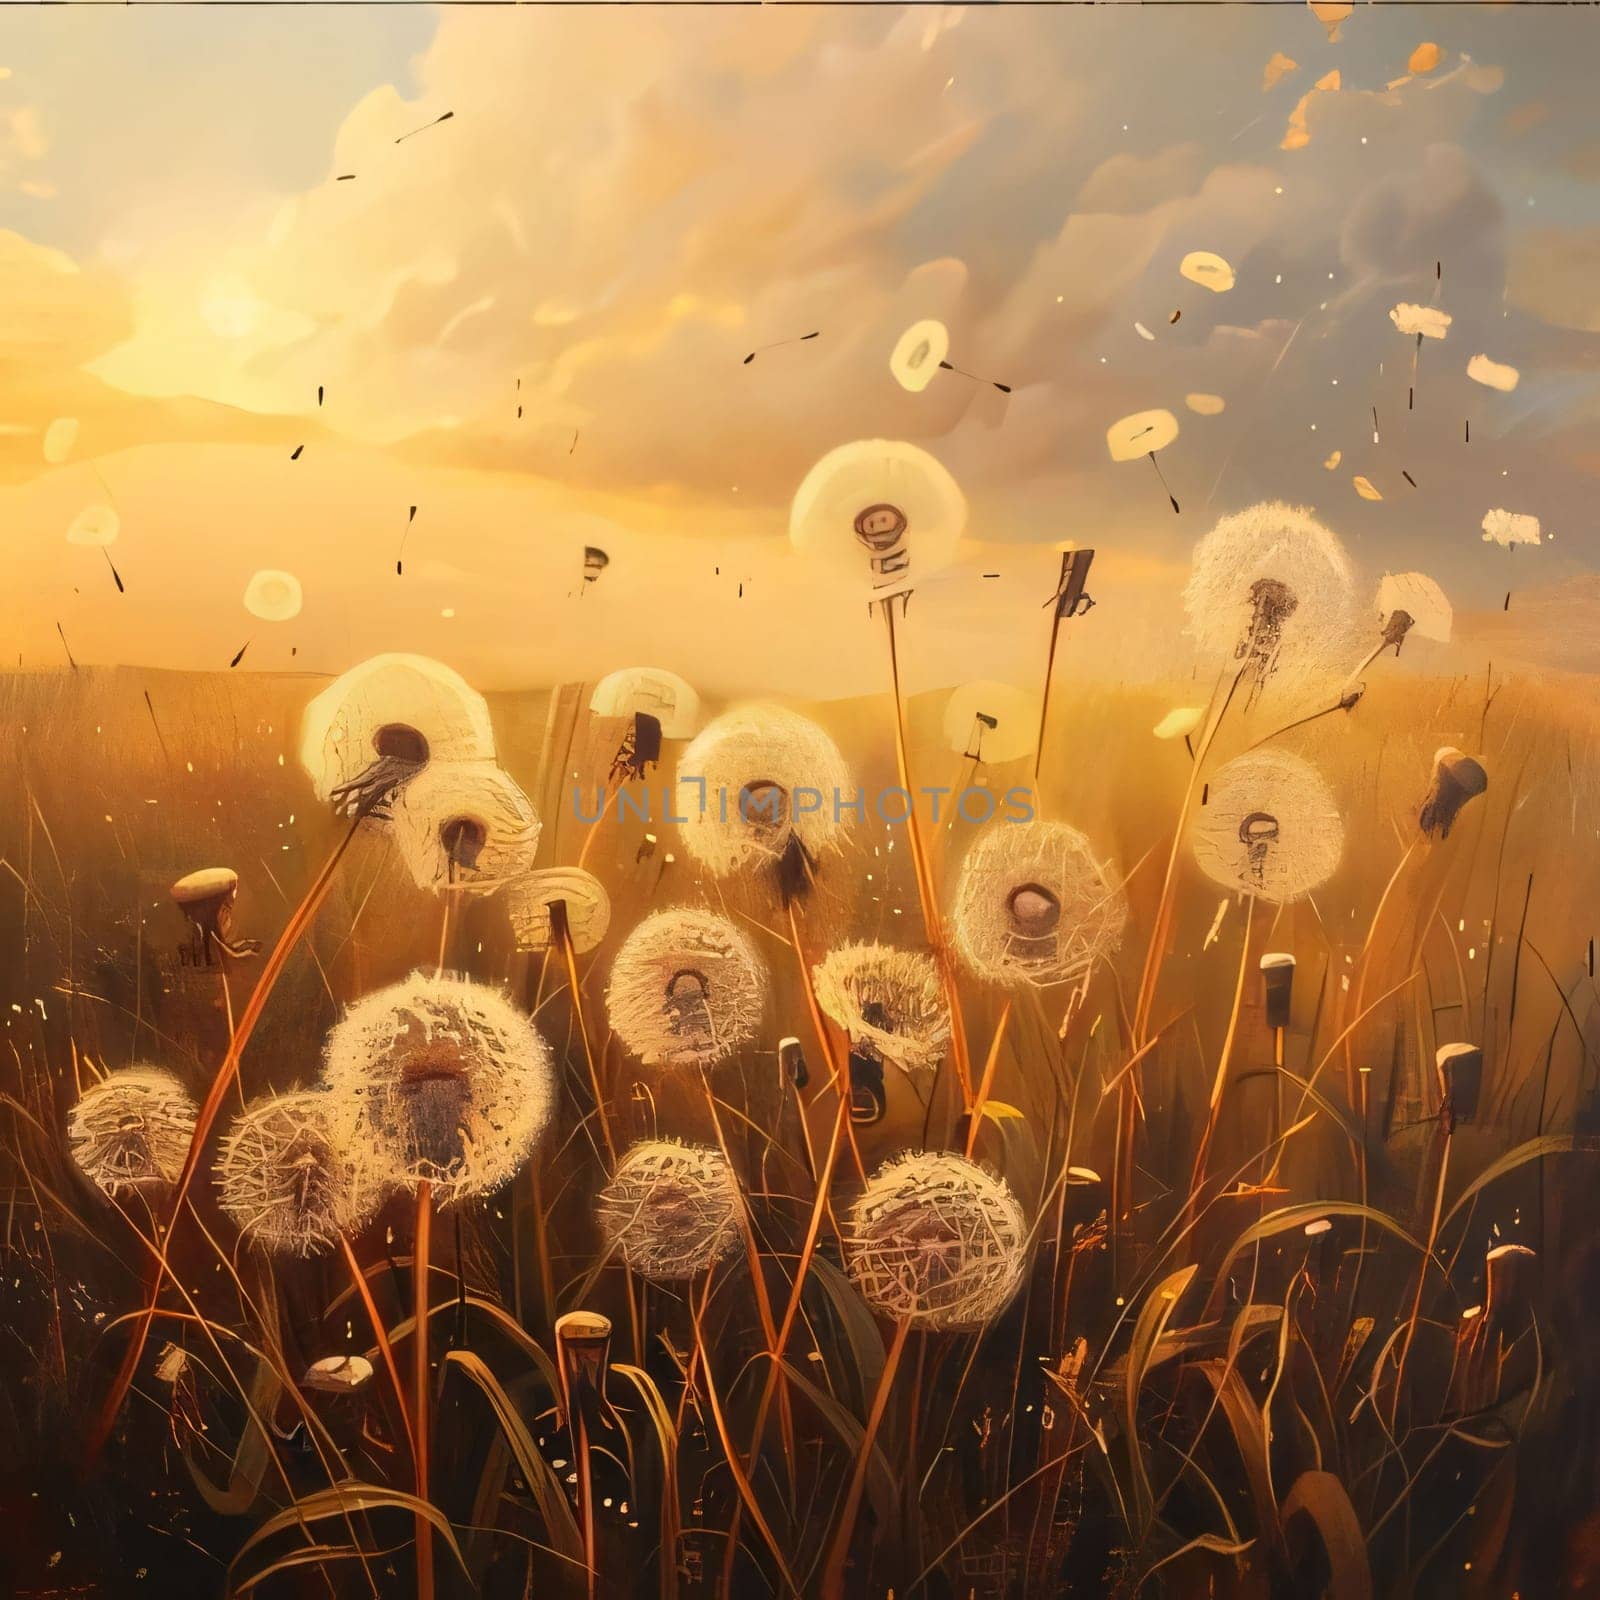 Dandelions in the grass. Sunset. Flowering flowers, a symbol of spring, new life. A joyful time of nature waking up to life.